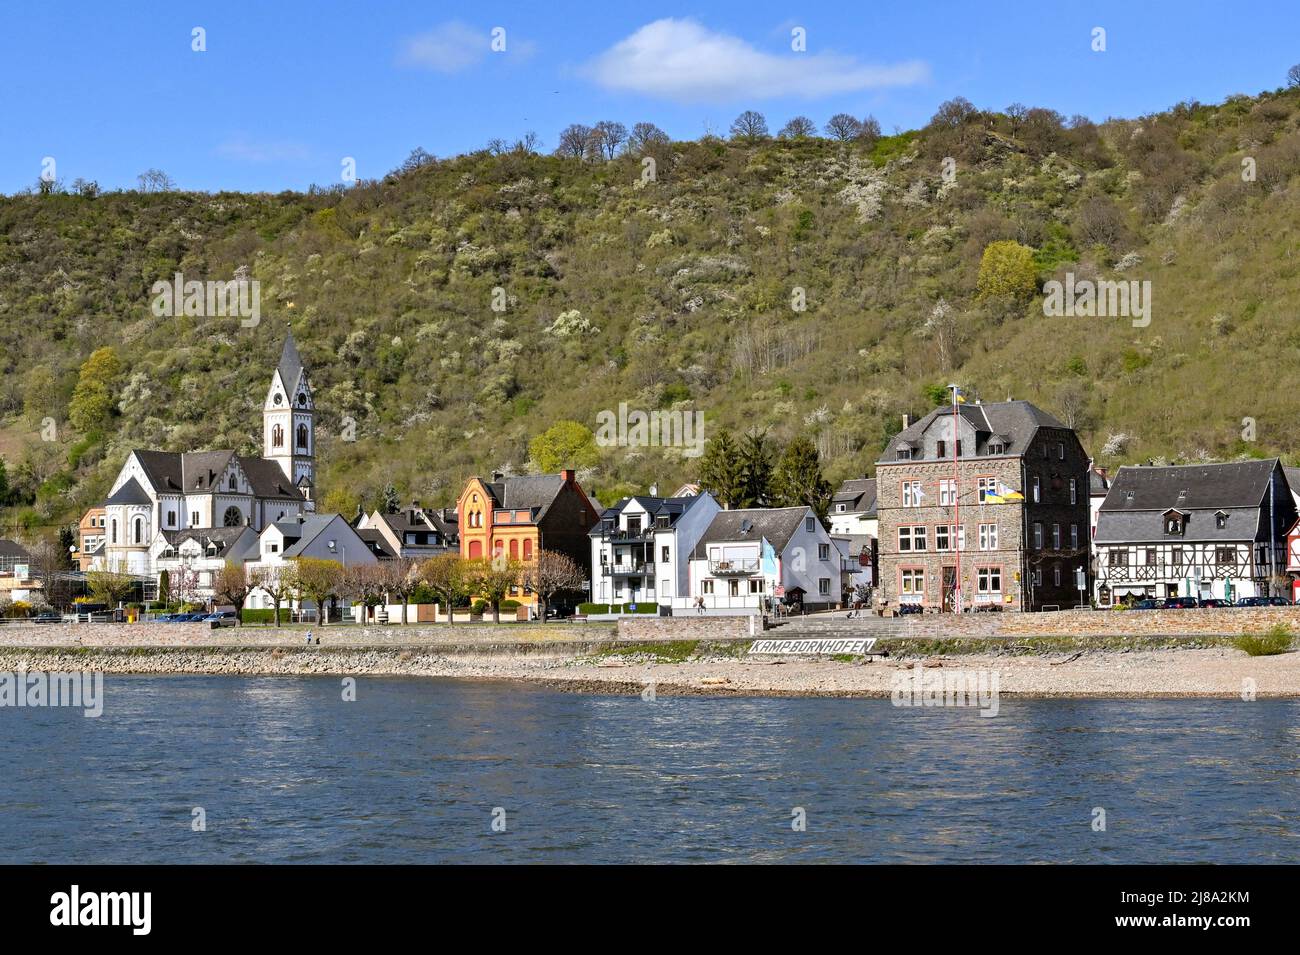 Kamp Bornhofen, Germany - April 2022: Waterfront buildings in Kamp Bornhofen which sits on the banks of the River Rhine Stock Photo